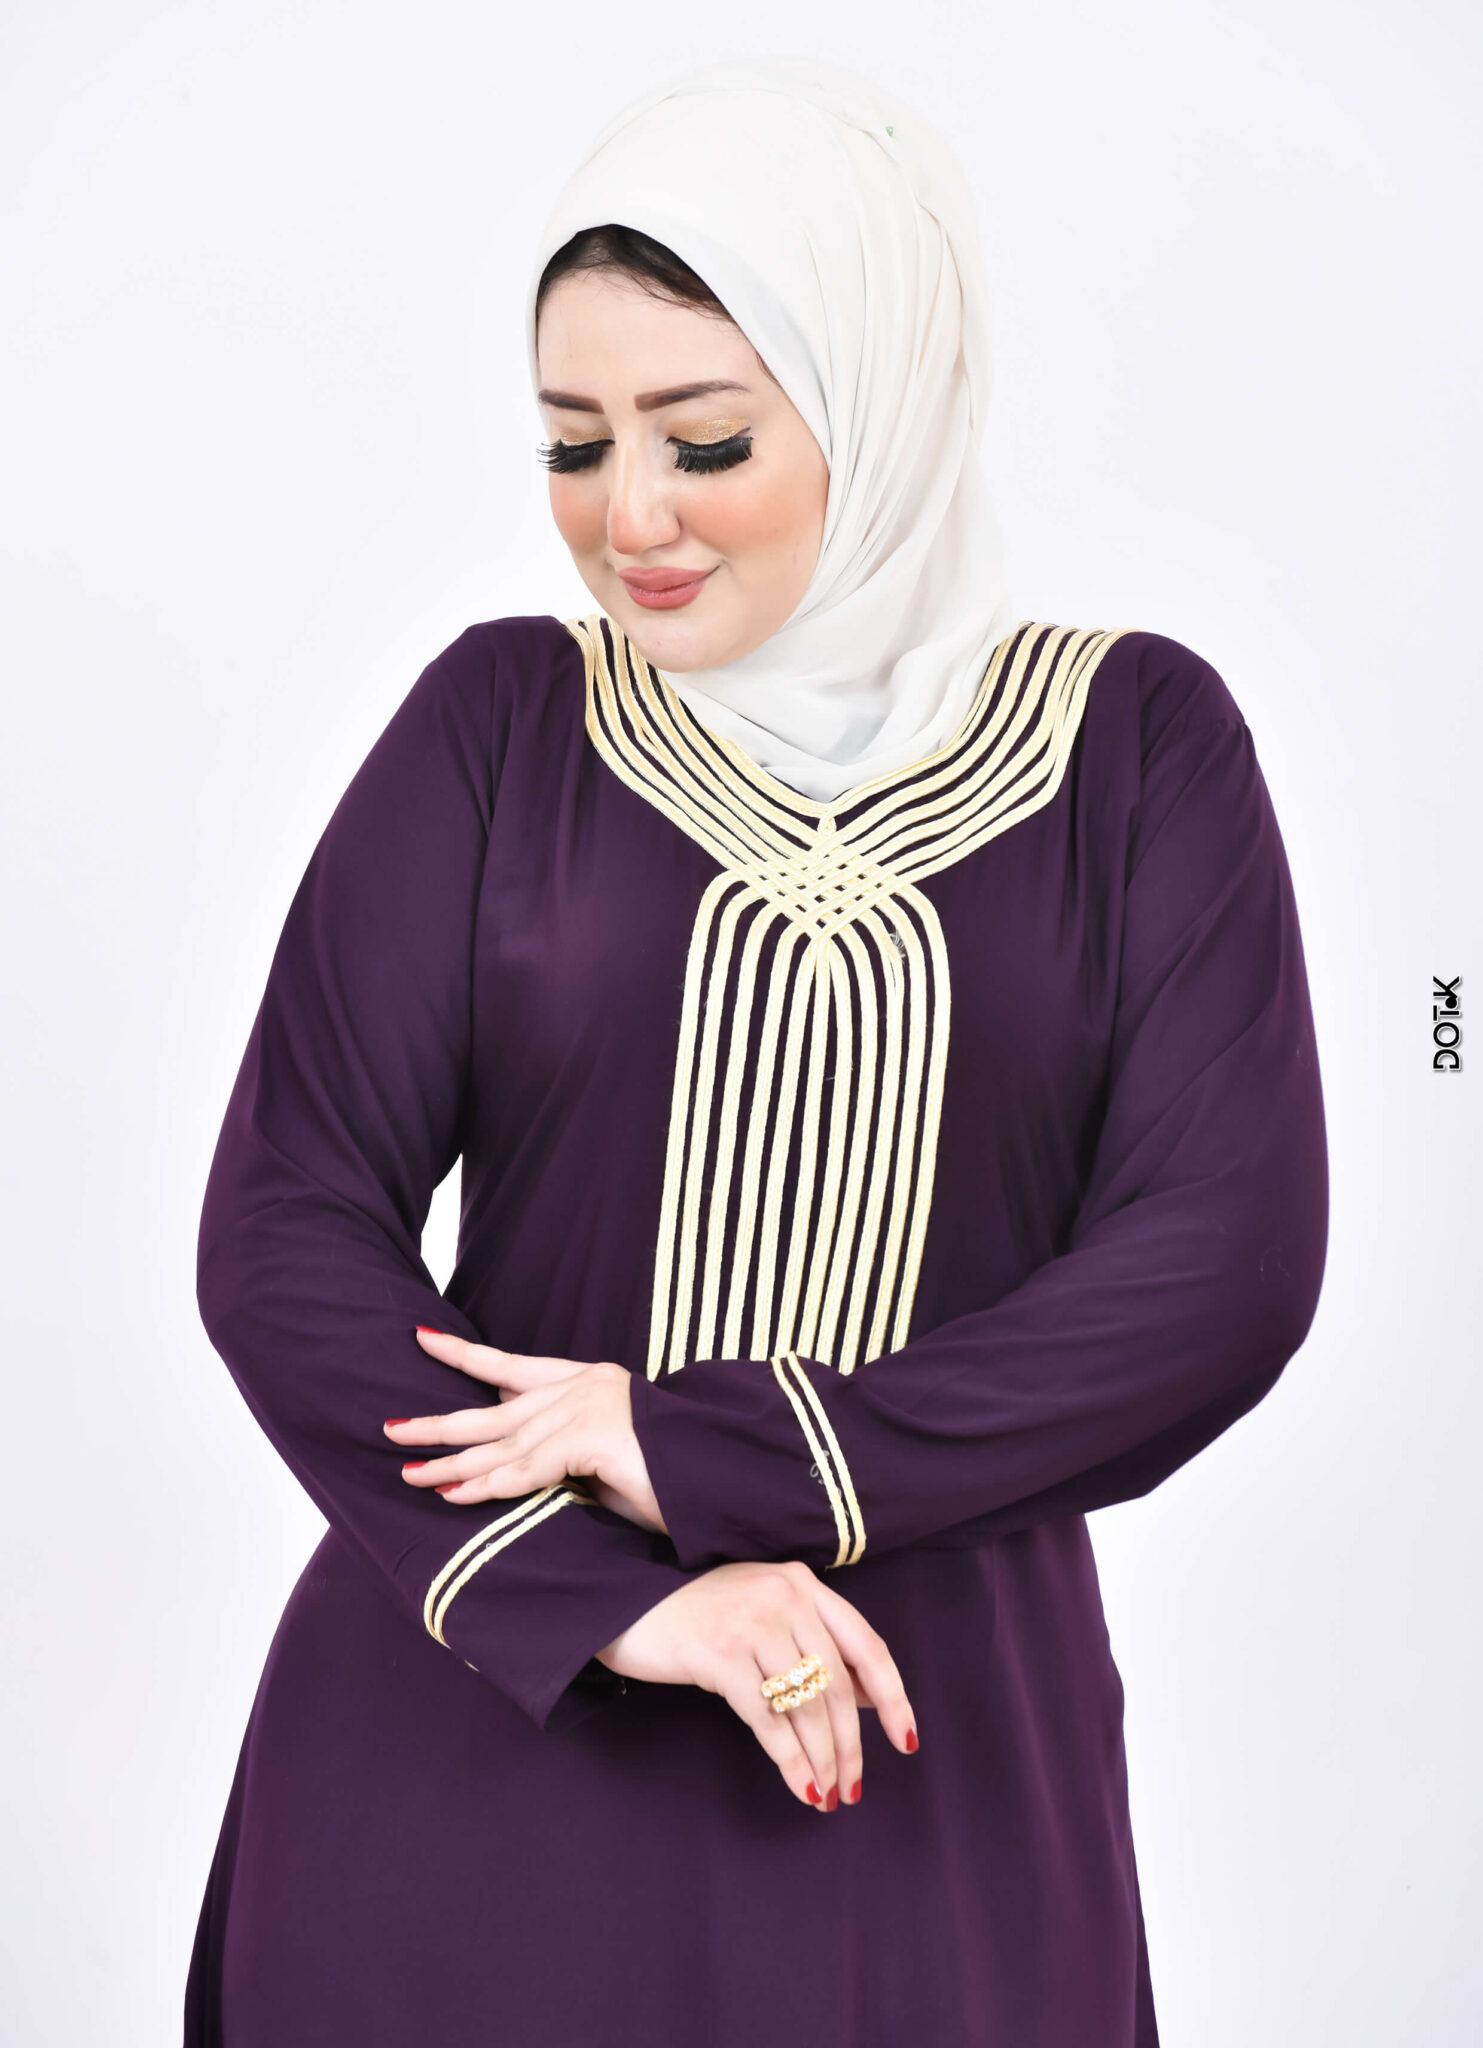 How to Buy an Abaya in the USA